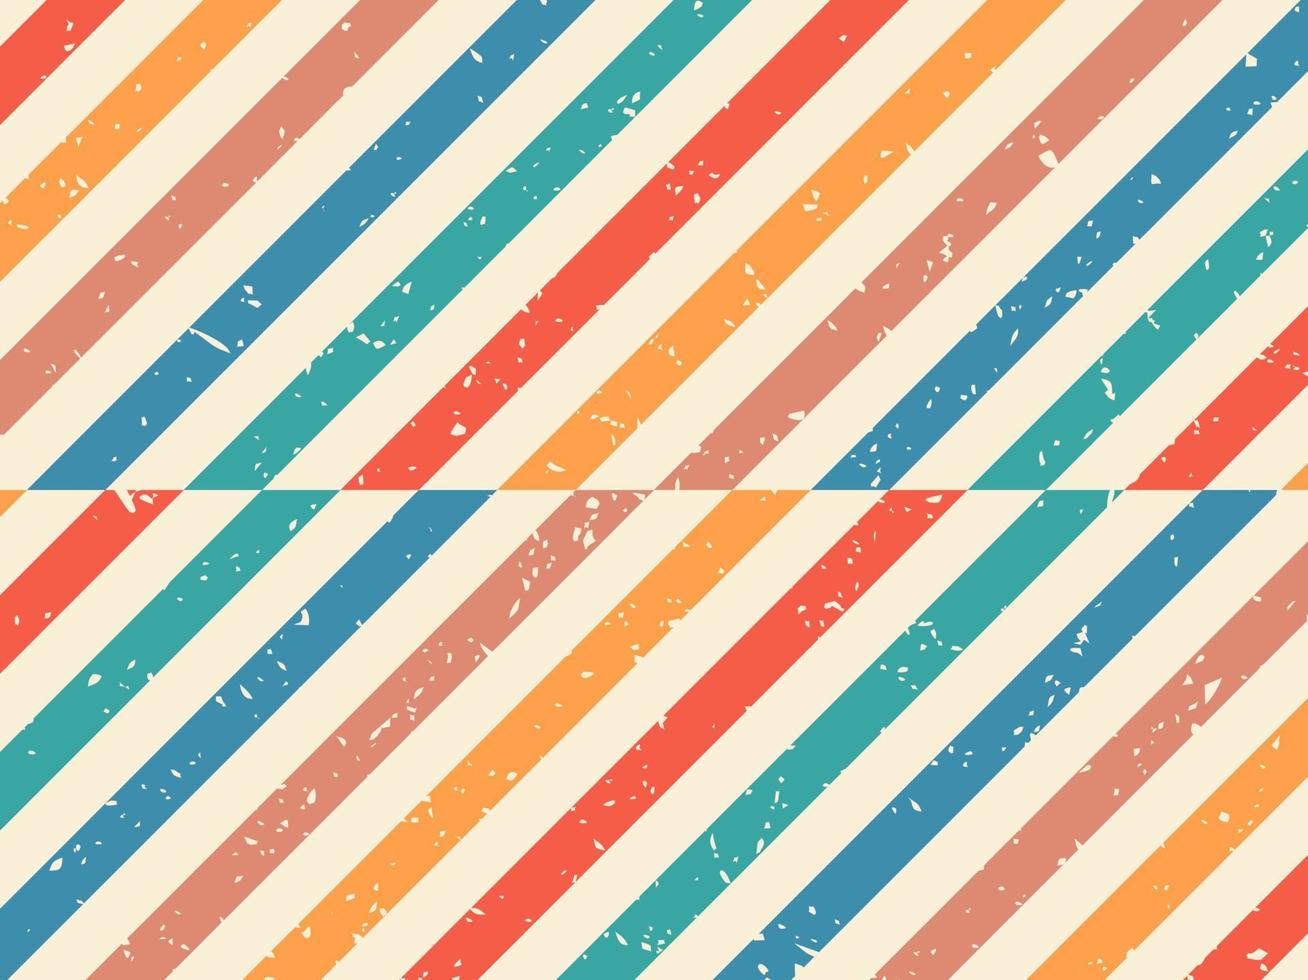 Retro Style Background With Grunge Texture vector